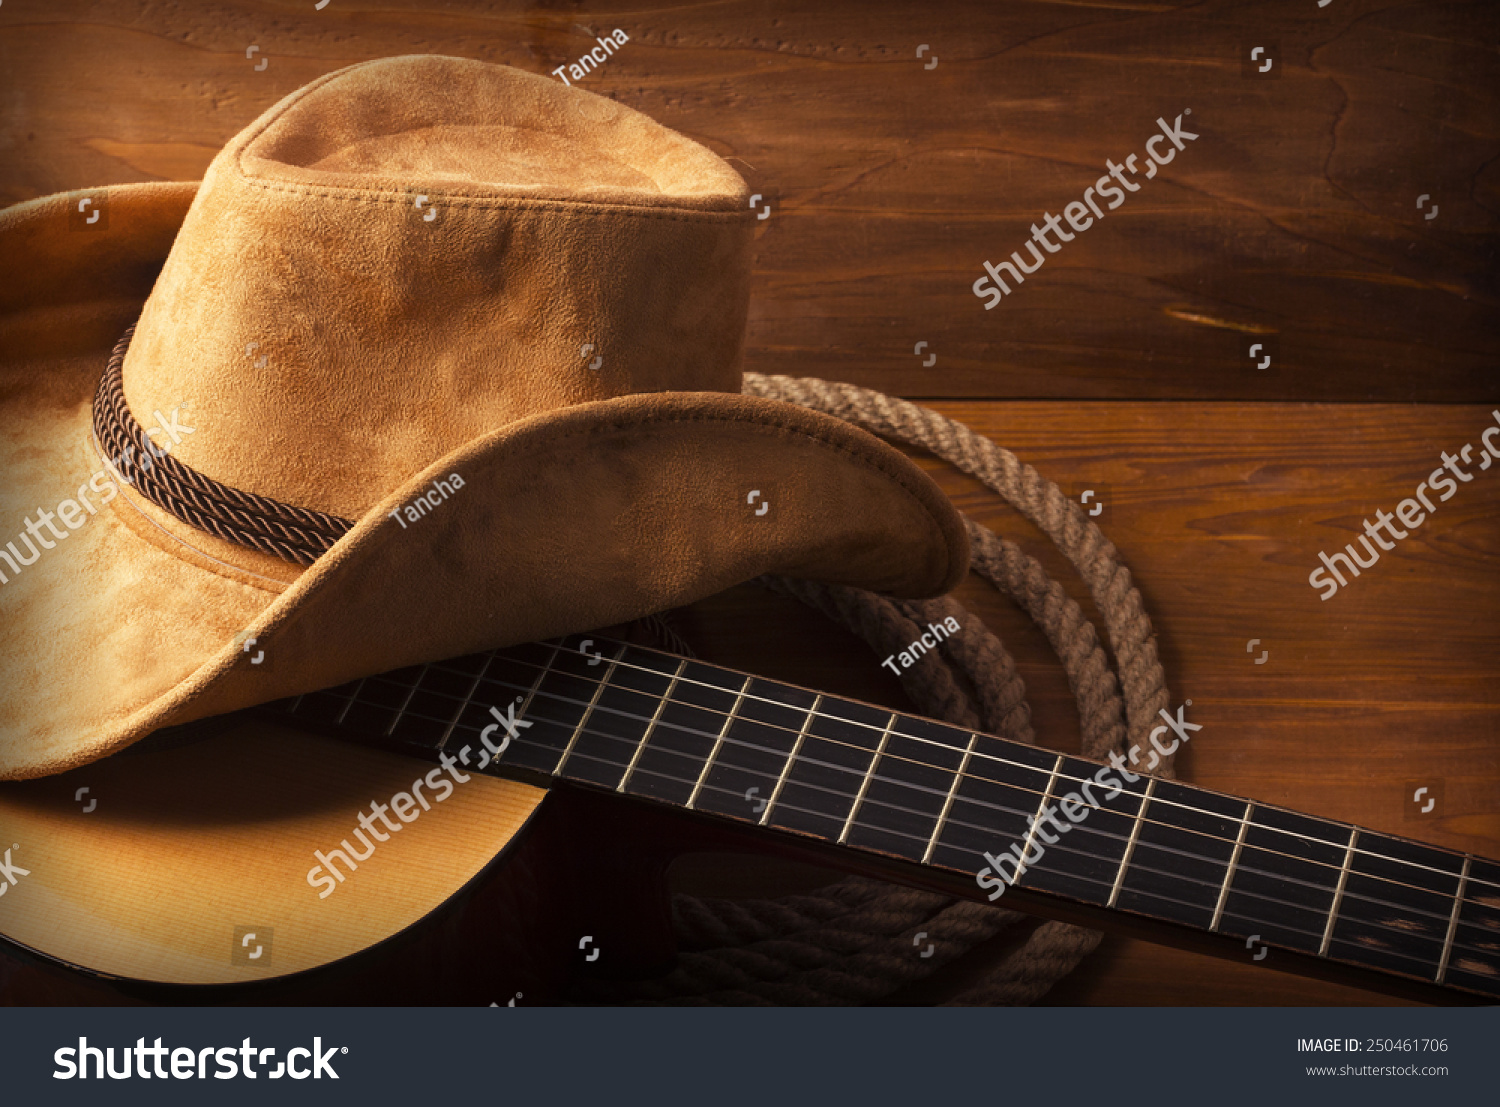 American Country music background with guitar and cowboy hat #250461706